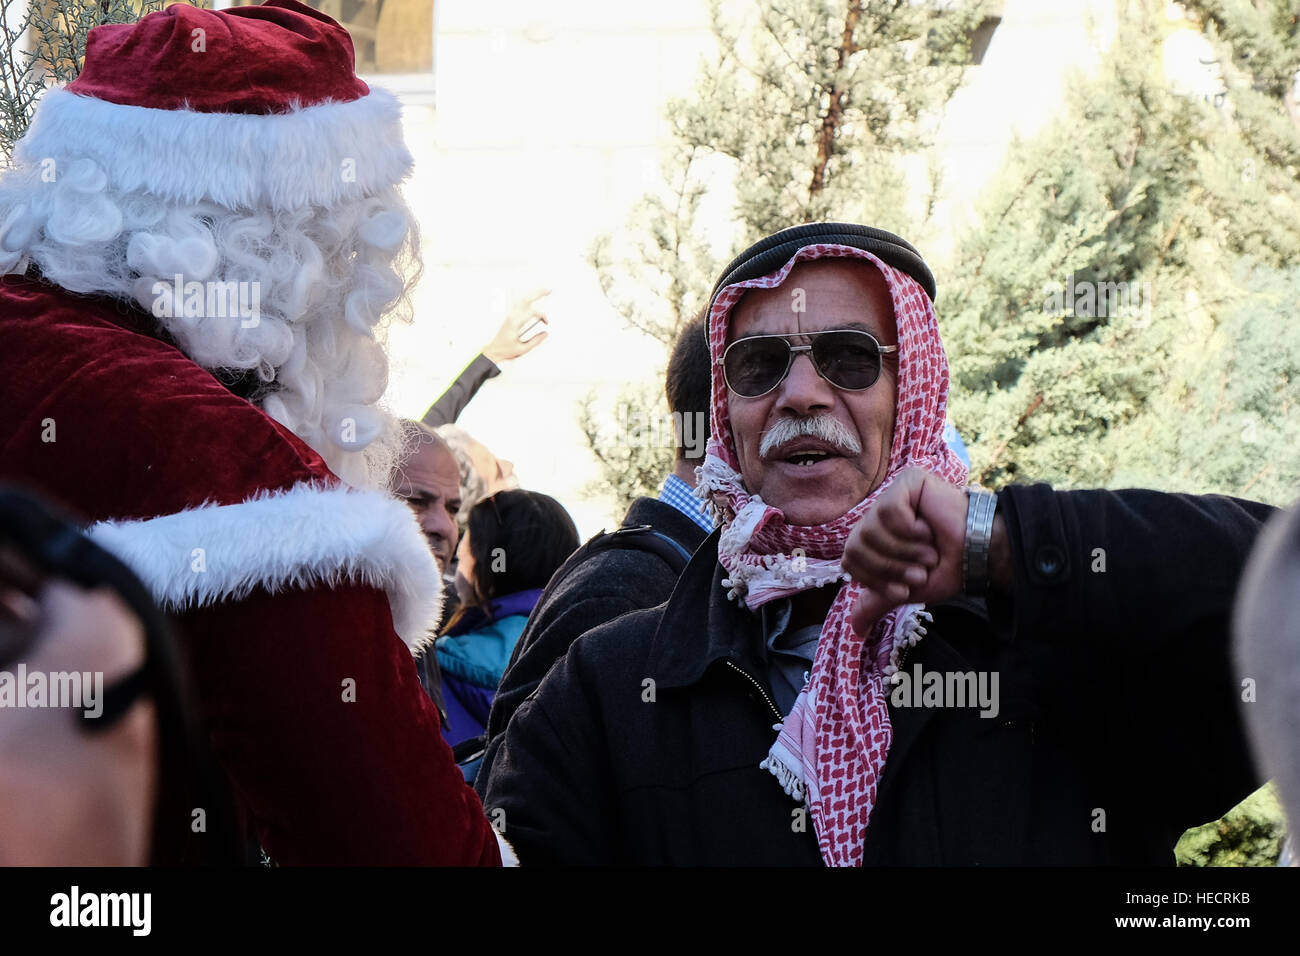 Jerusalem, Israel. 20th December, 2016. Santa Claus, or 'Baba Noel' as he is called in the local Arab language, greets a Muslim man at Jerusalem's Old City Jaffa Gate. The Jerusalem Municipality and the Jewish National Fund distributed specially grown Cyprus Cedar Christmas trees to the Christian population at the Jaffa Gate. Credit: Nir Alon/Alamy Live News Stock Photo